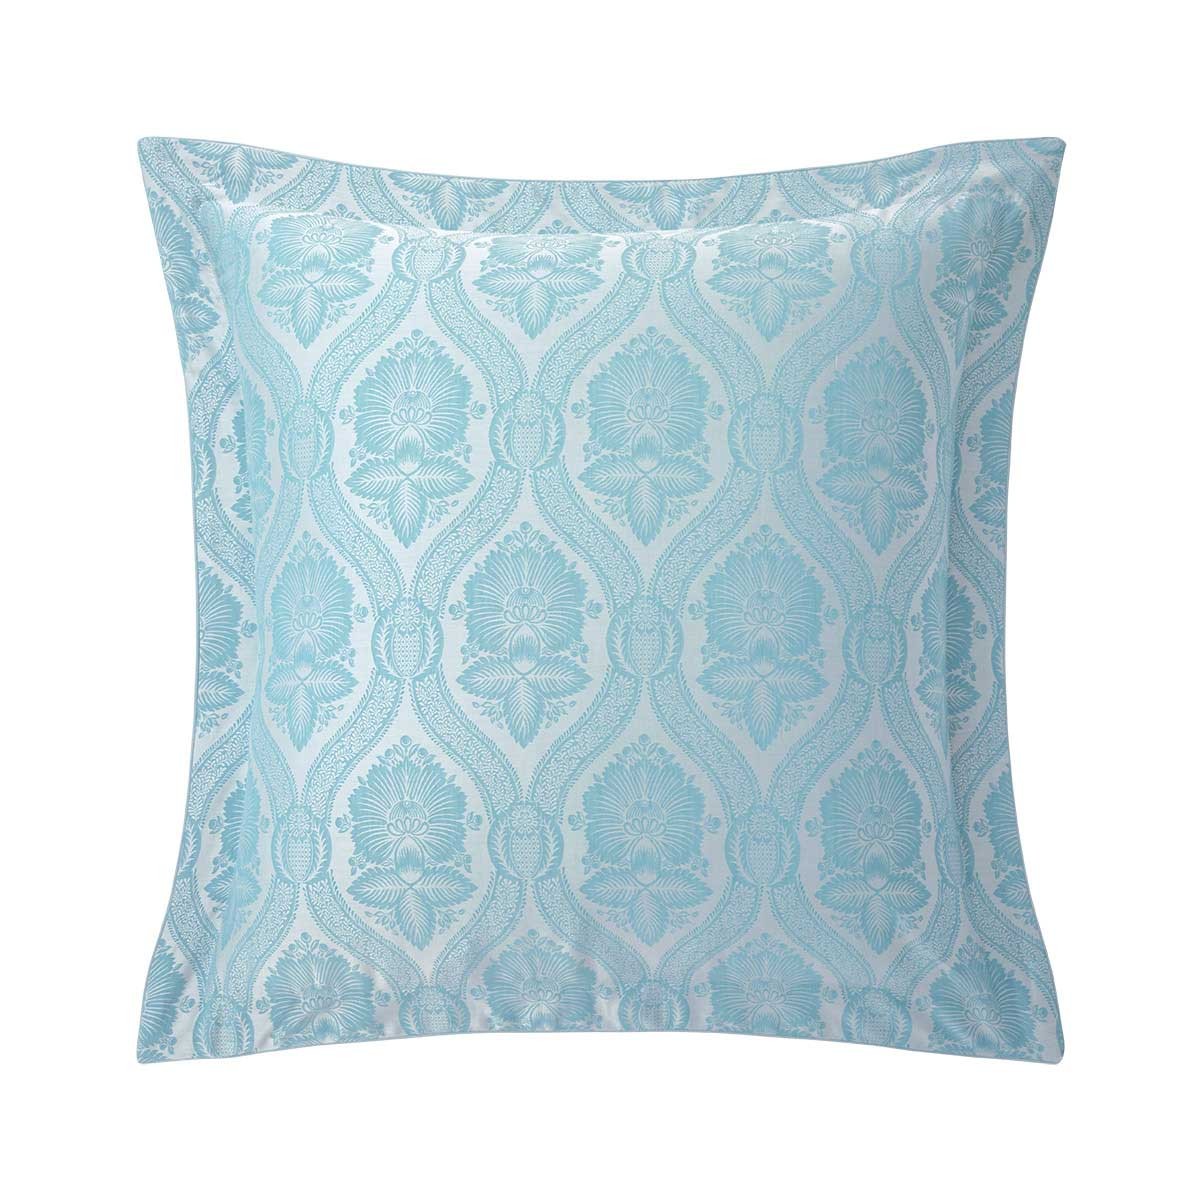 Yves Embrace Delorme Tranquility Bleu Nil | Collection Bed